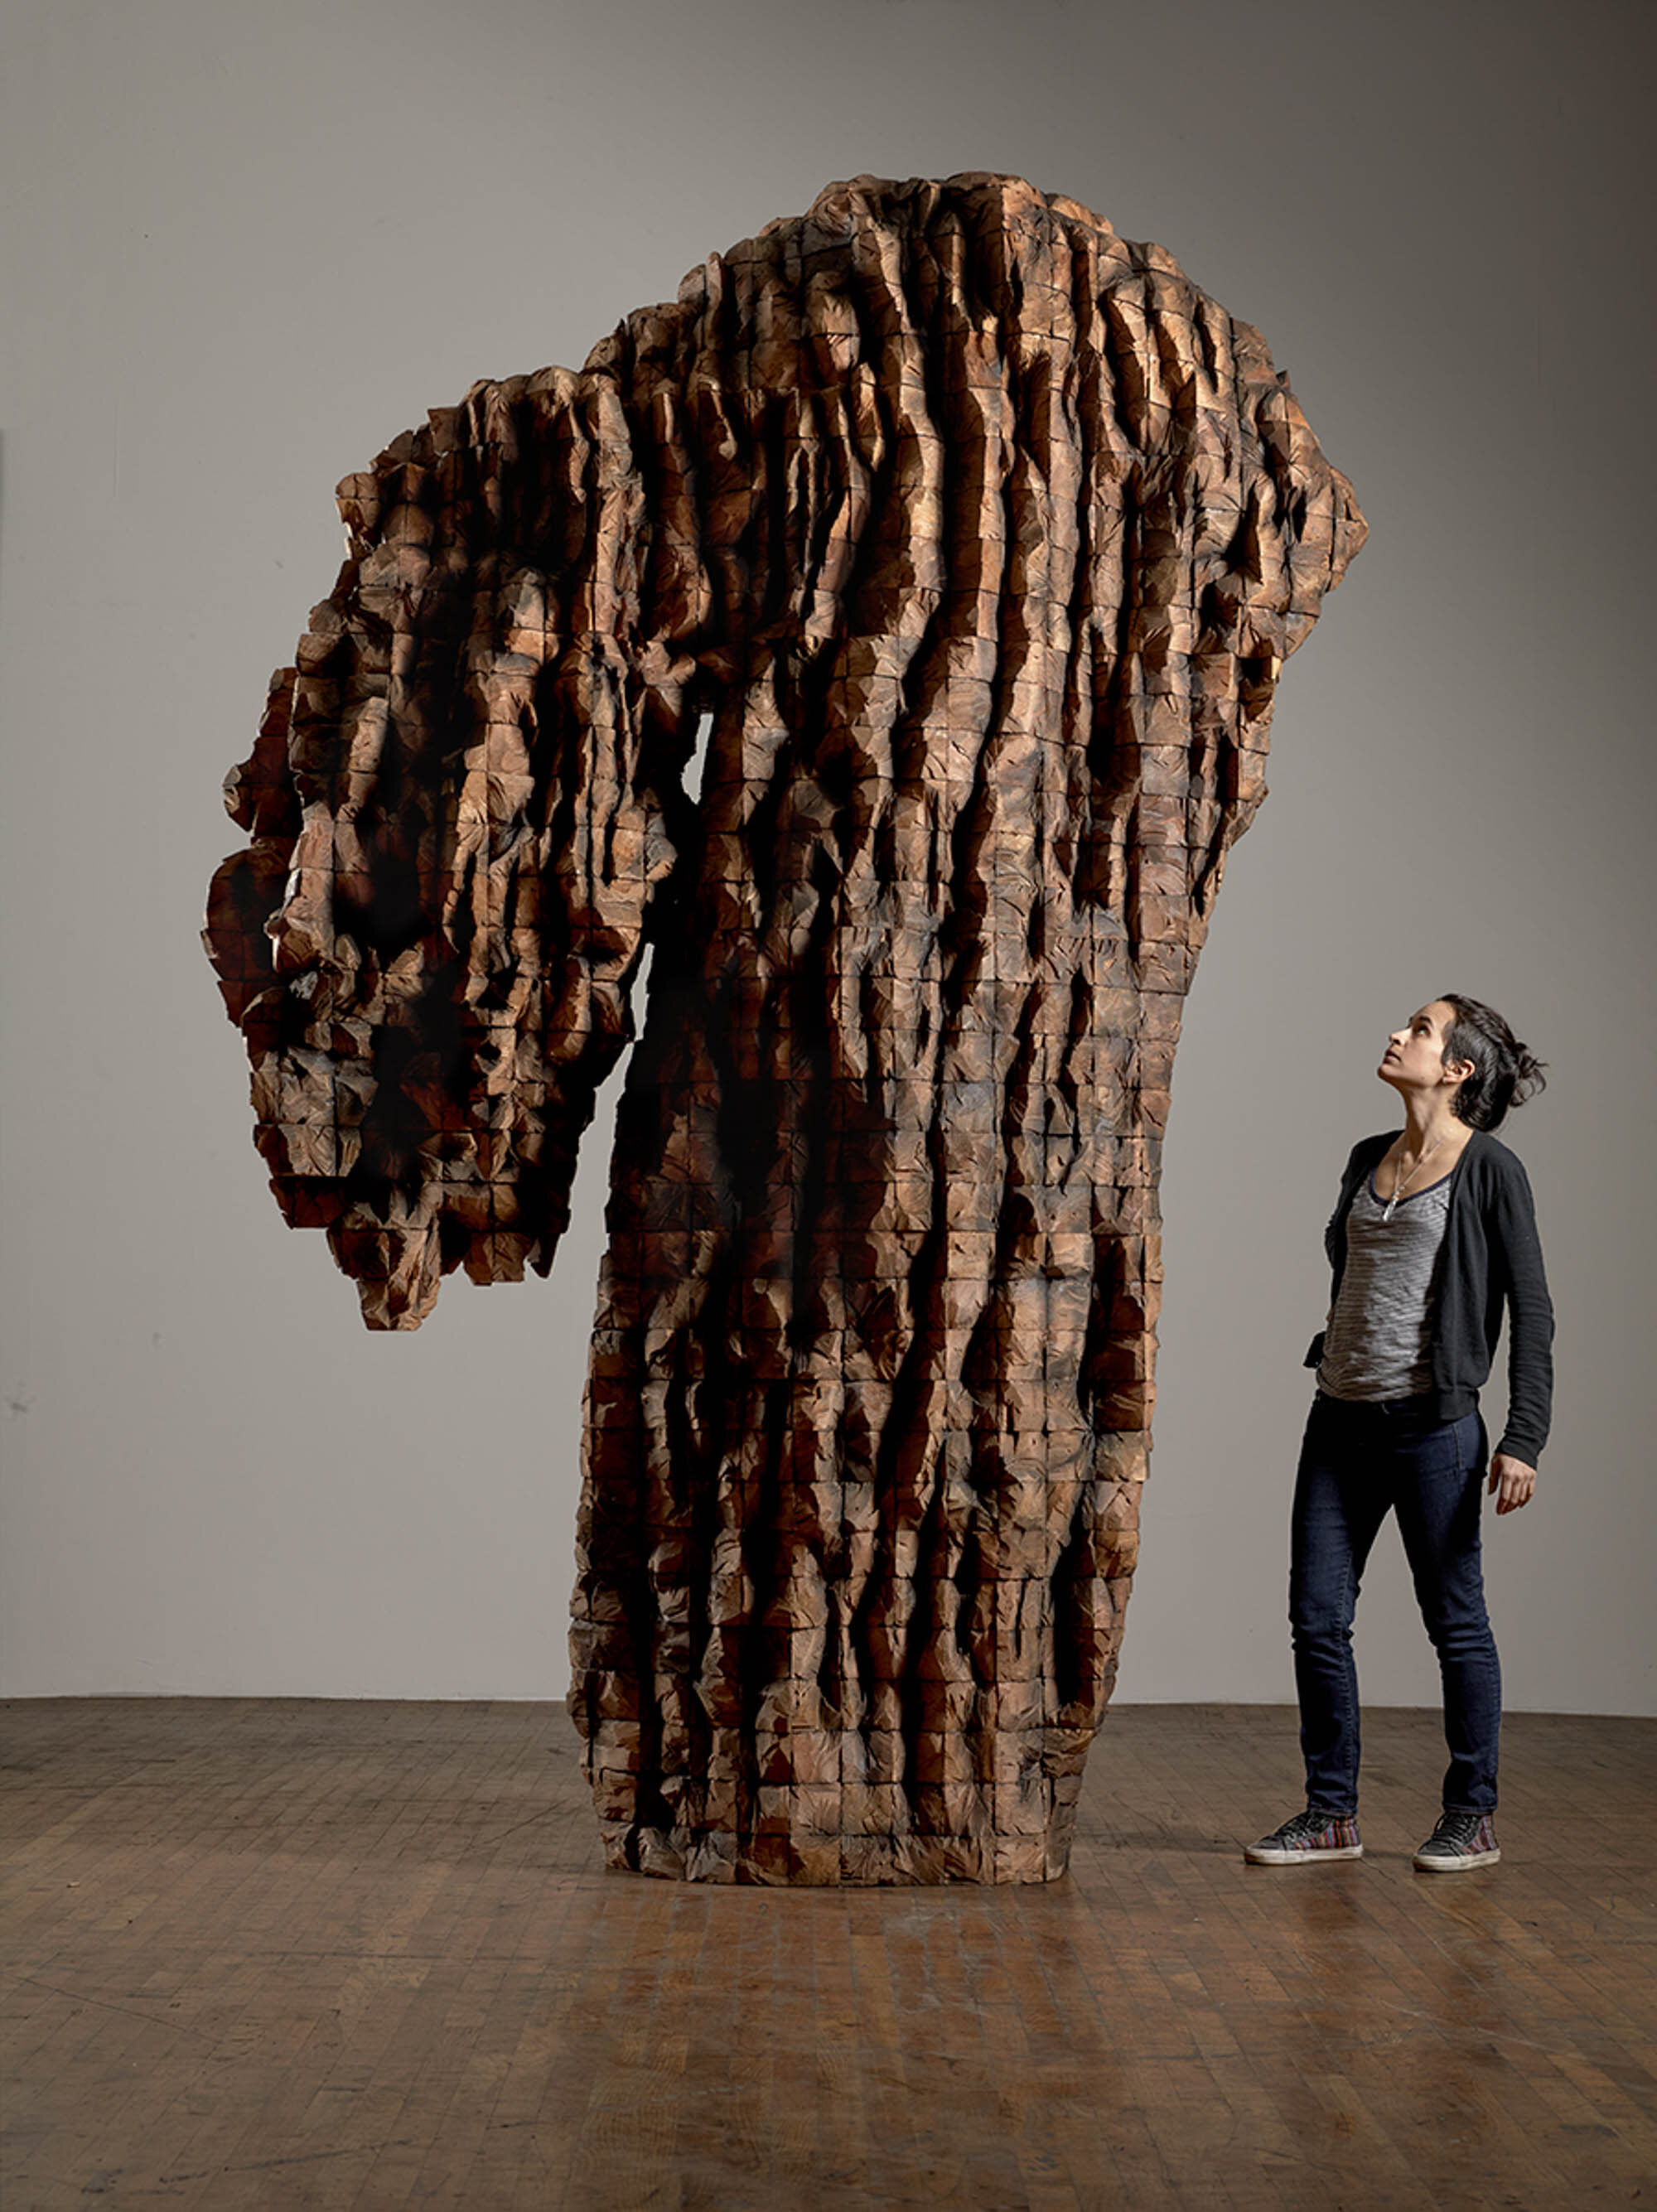       for Natasha , 2015 Cedar and graphite 115 x 79 x 42 in.    MORE IMAGES   The Fabric Workshop and Museum   National Museum Of Women In The Arts  